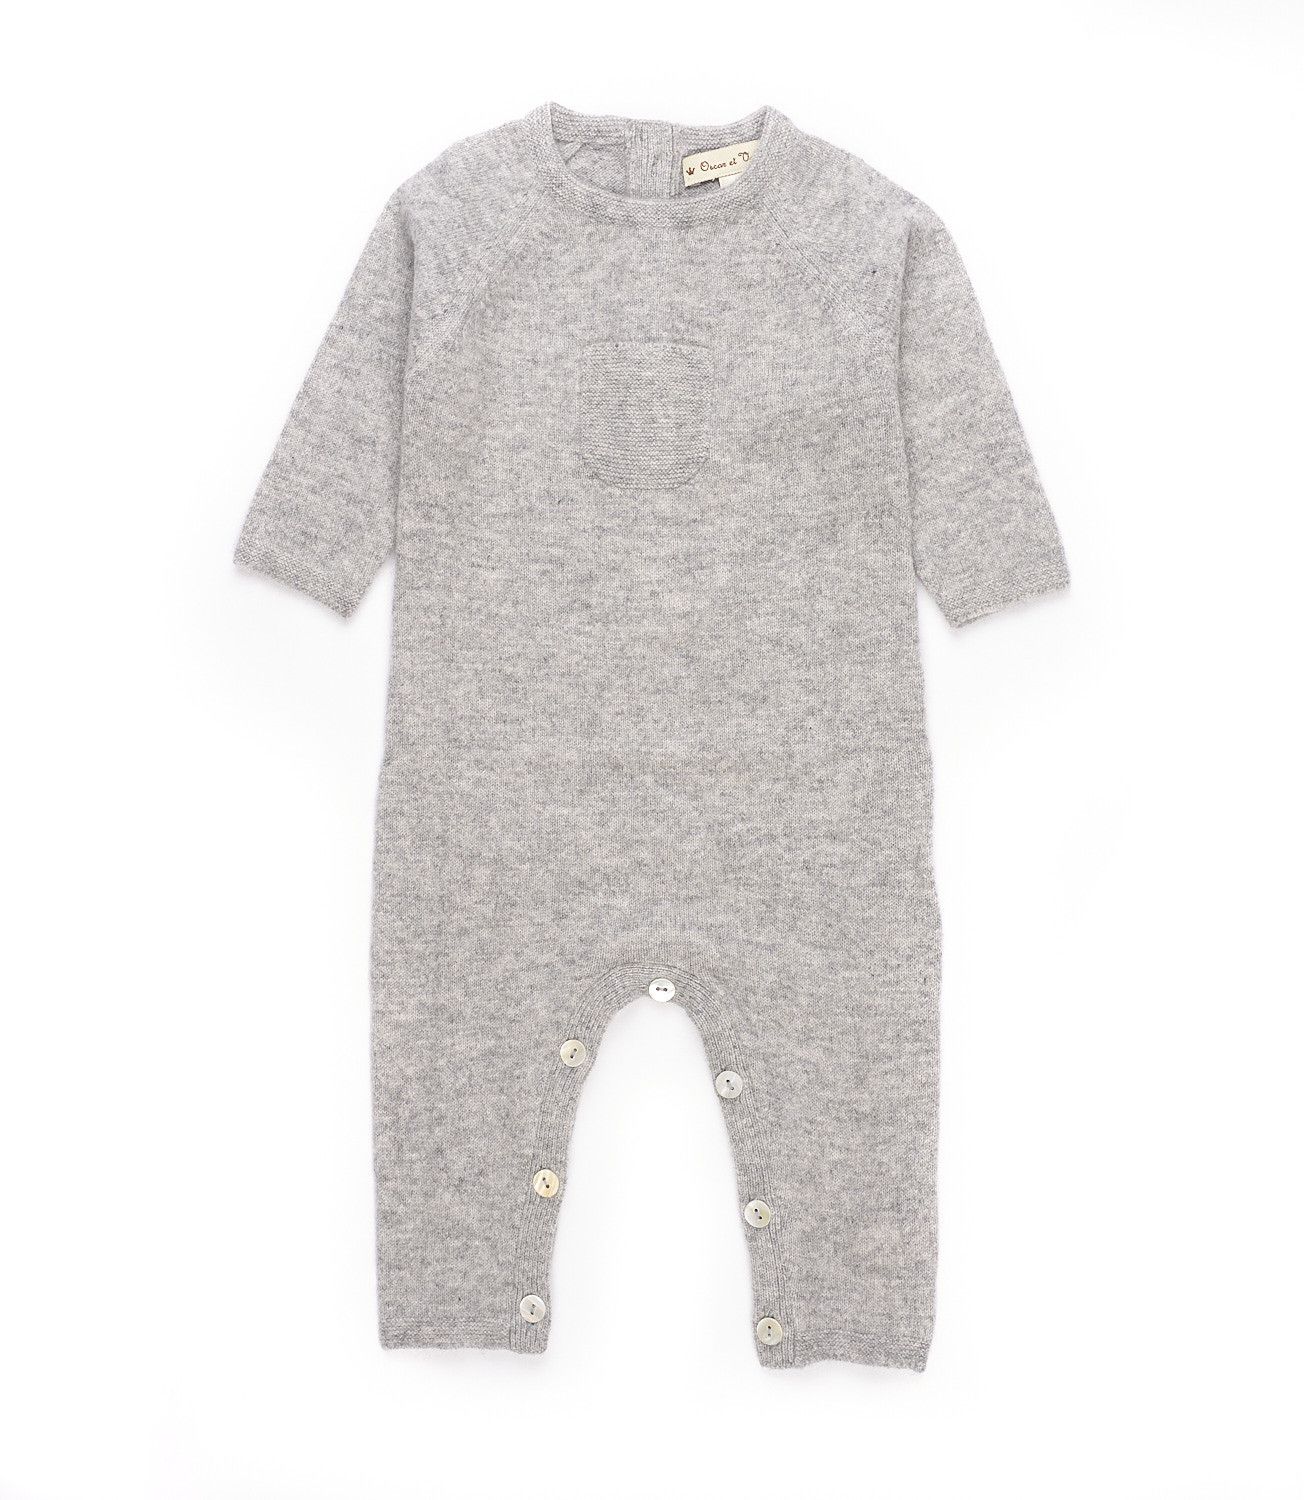 New arrivals - 100% cashmere clothing and accessories for babies and ...